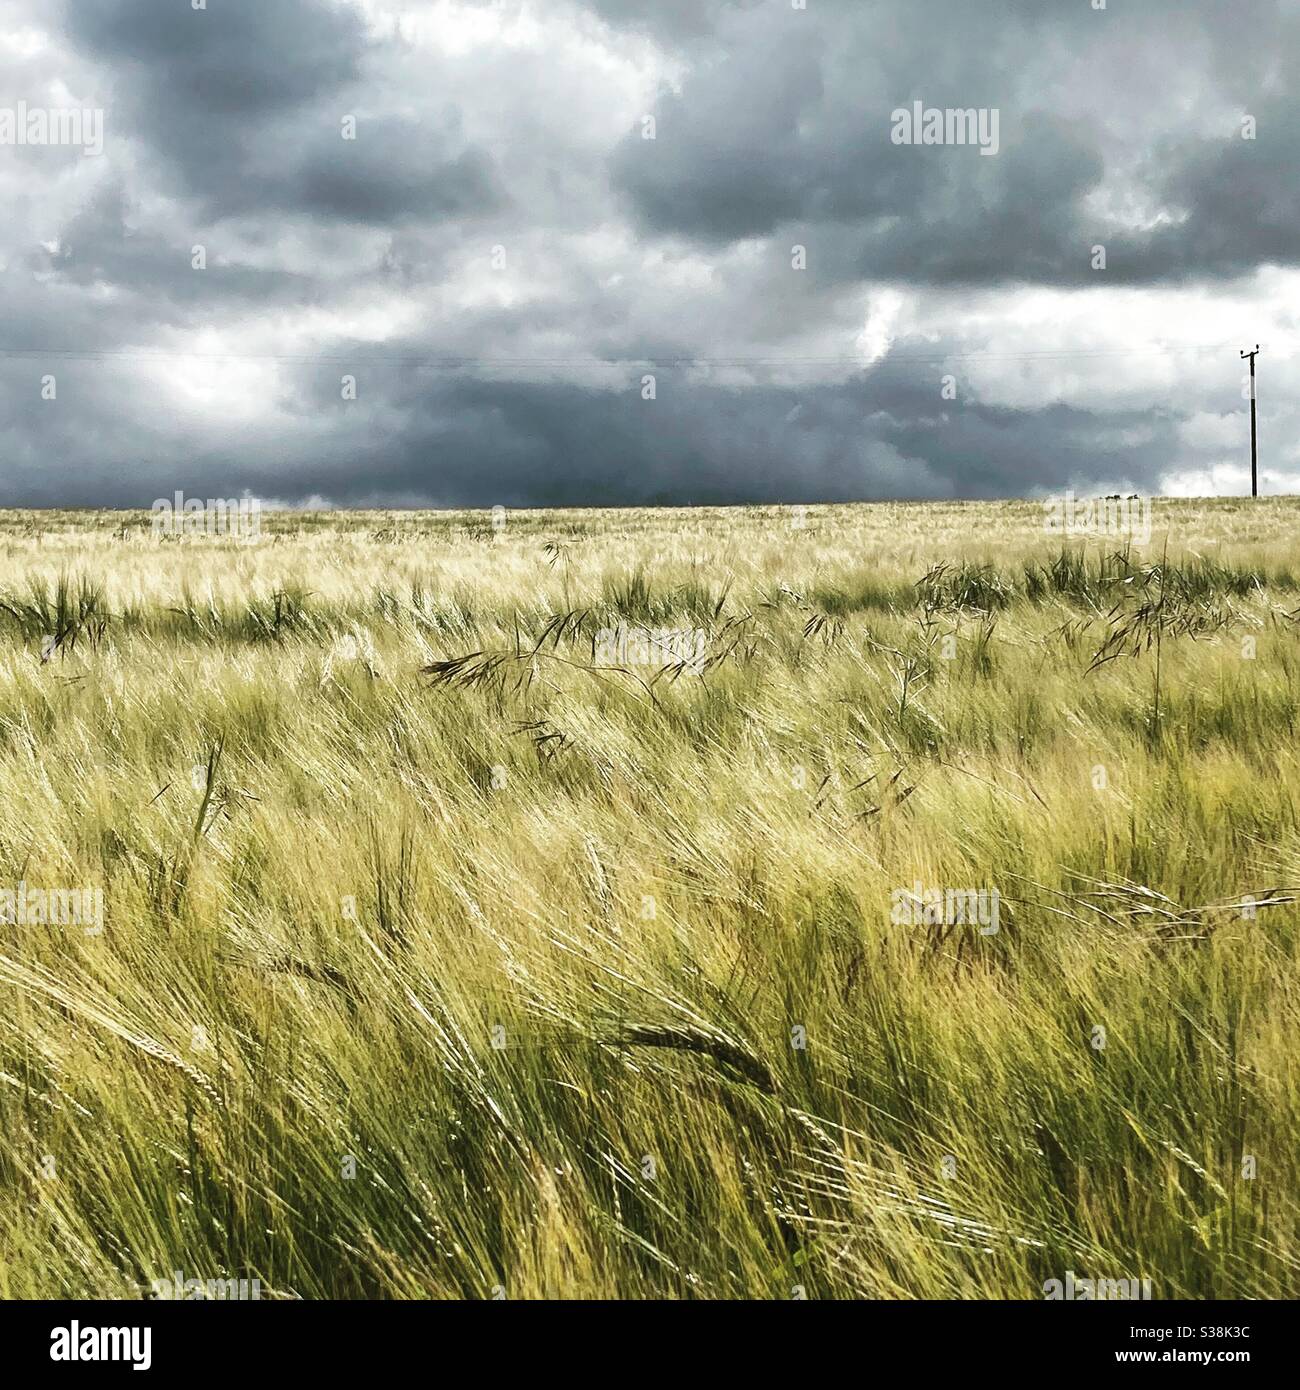 It’s harvest time in south-east Scotland, but there’s a storm threatening. This farm is in the foothills of the Lammermuirs near Gifford in East Lothian. Stock Photo